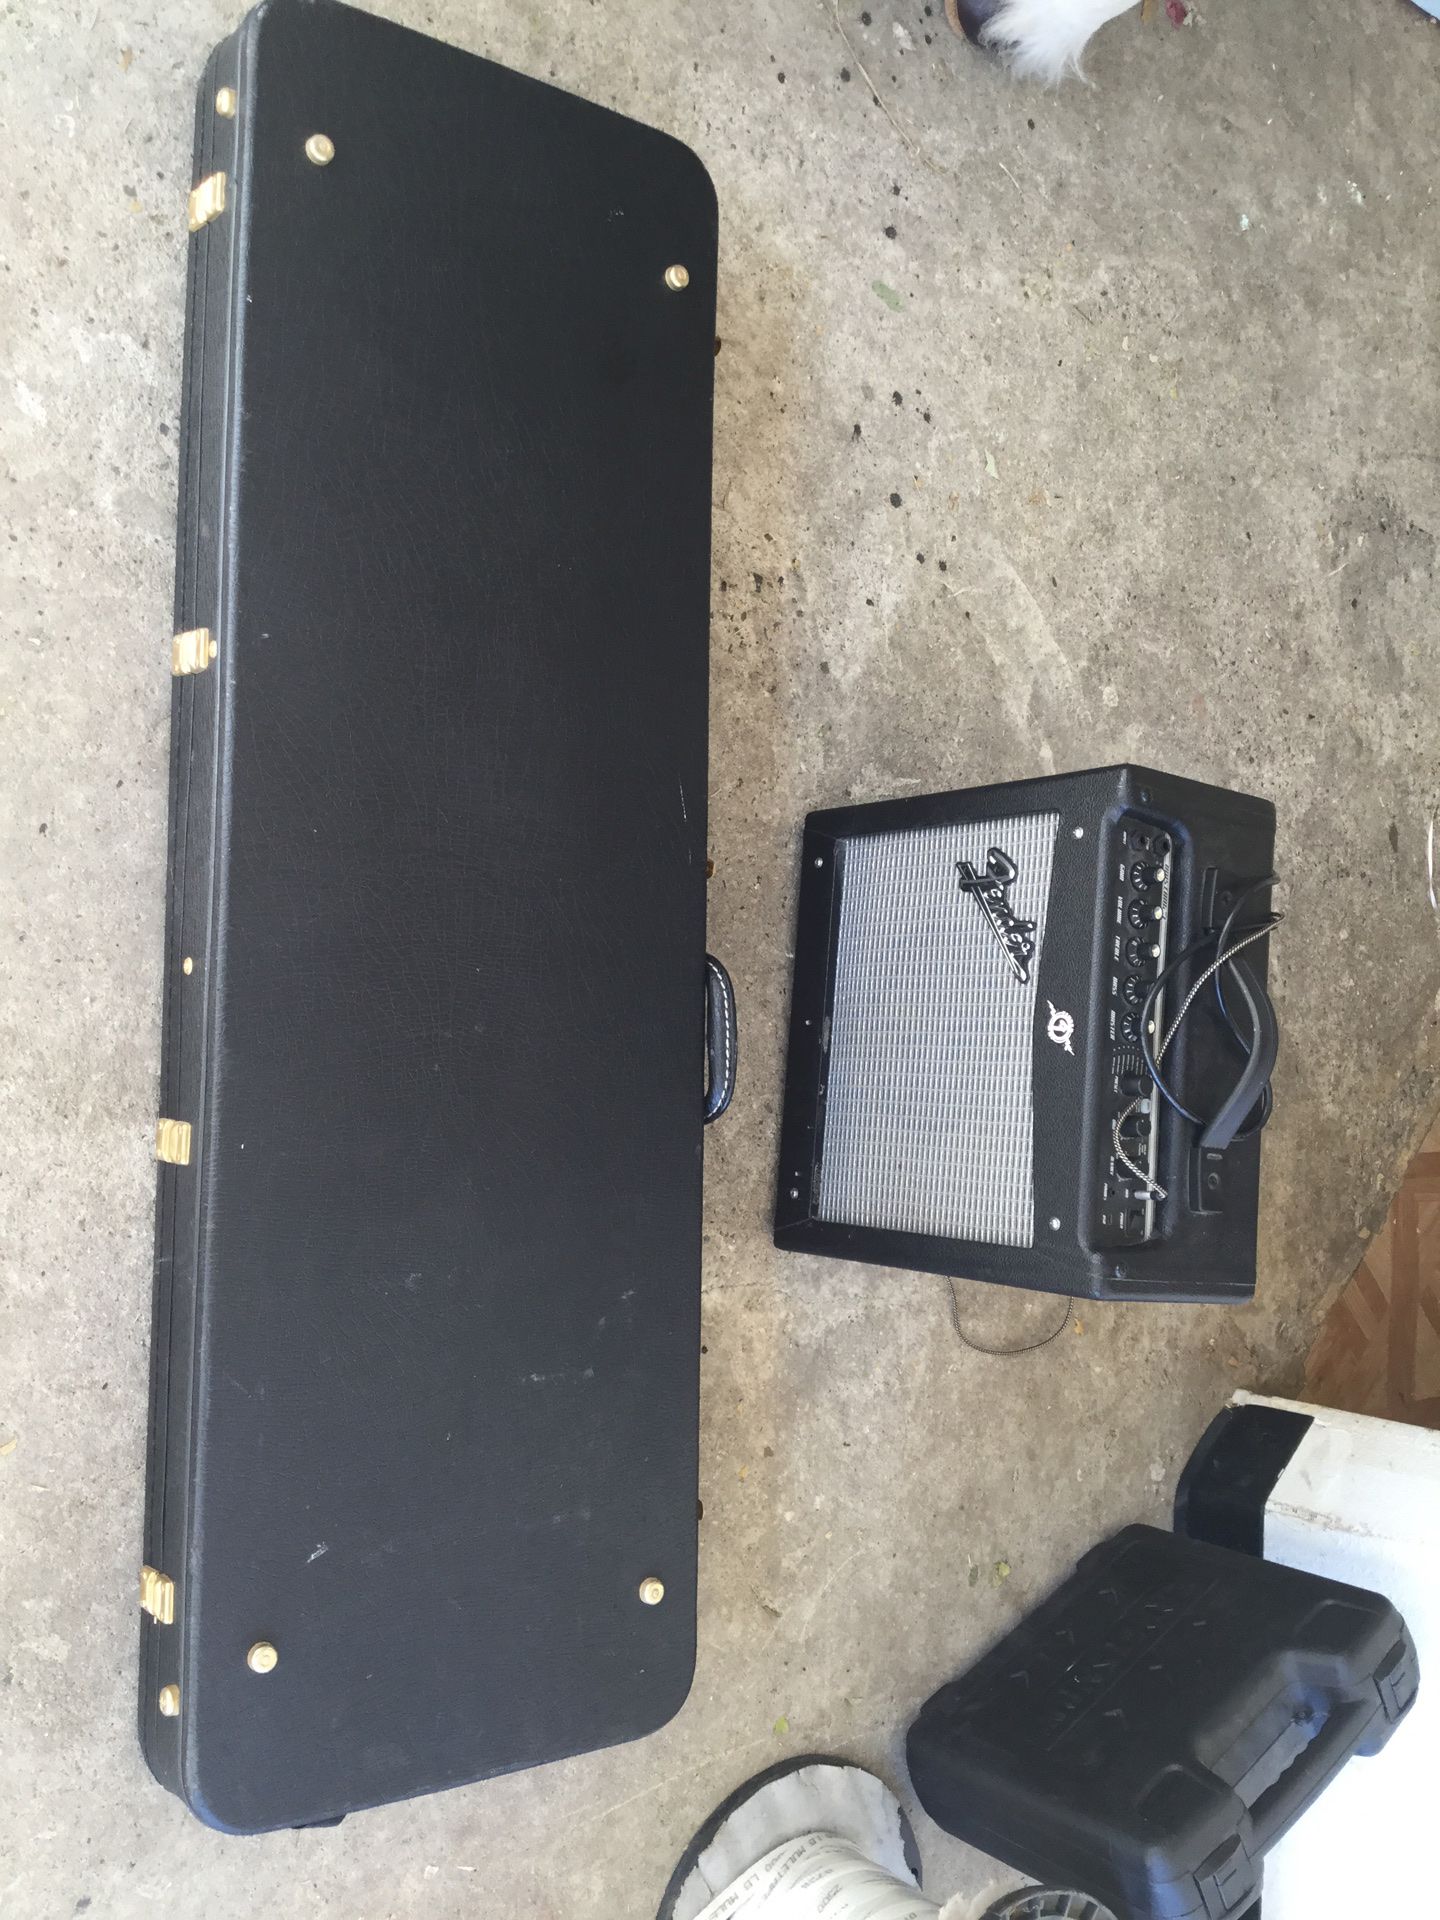 Bass guitar , speaker is included 150 $$$ and cables obo